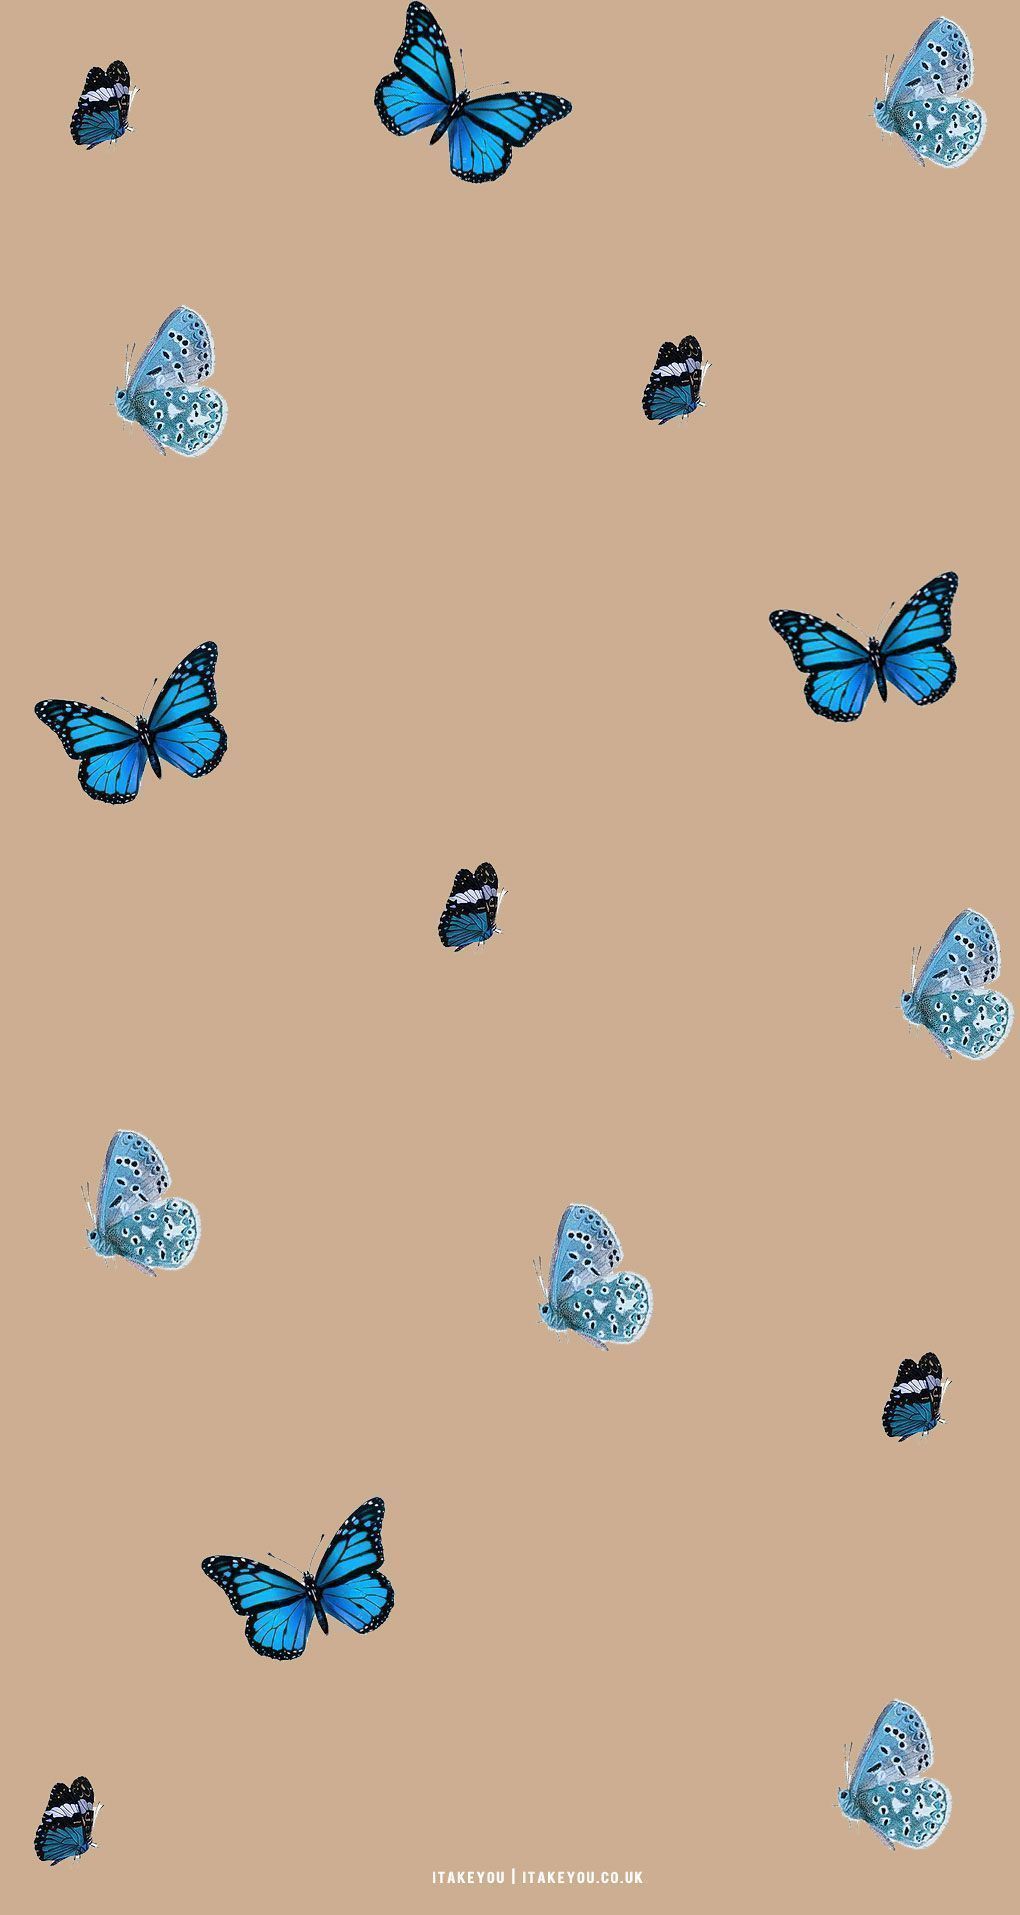 Cute Brown Aesthetic Wallpaper for Phone : Butterflies I Take You. Wedding Readings. Wedding Ideas